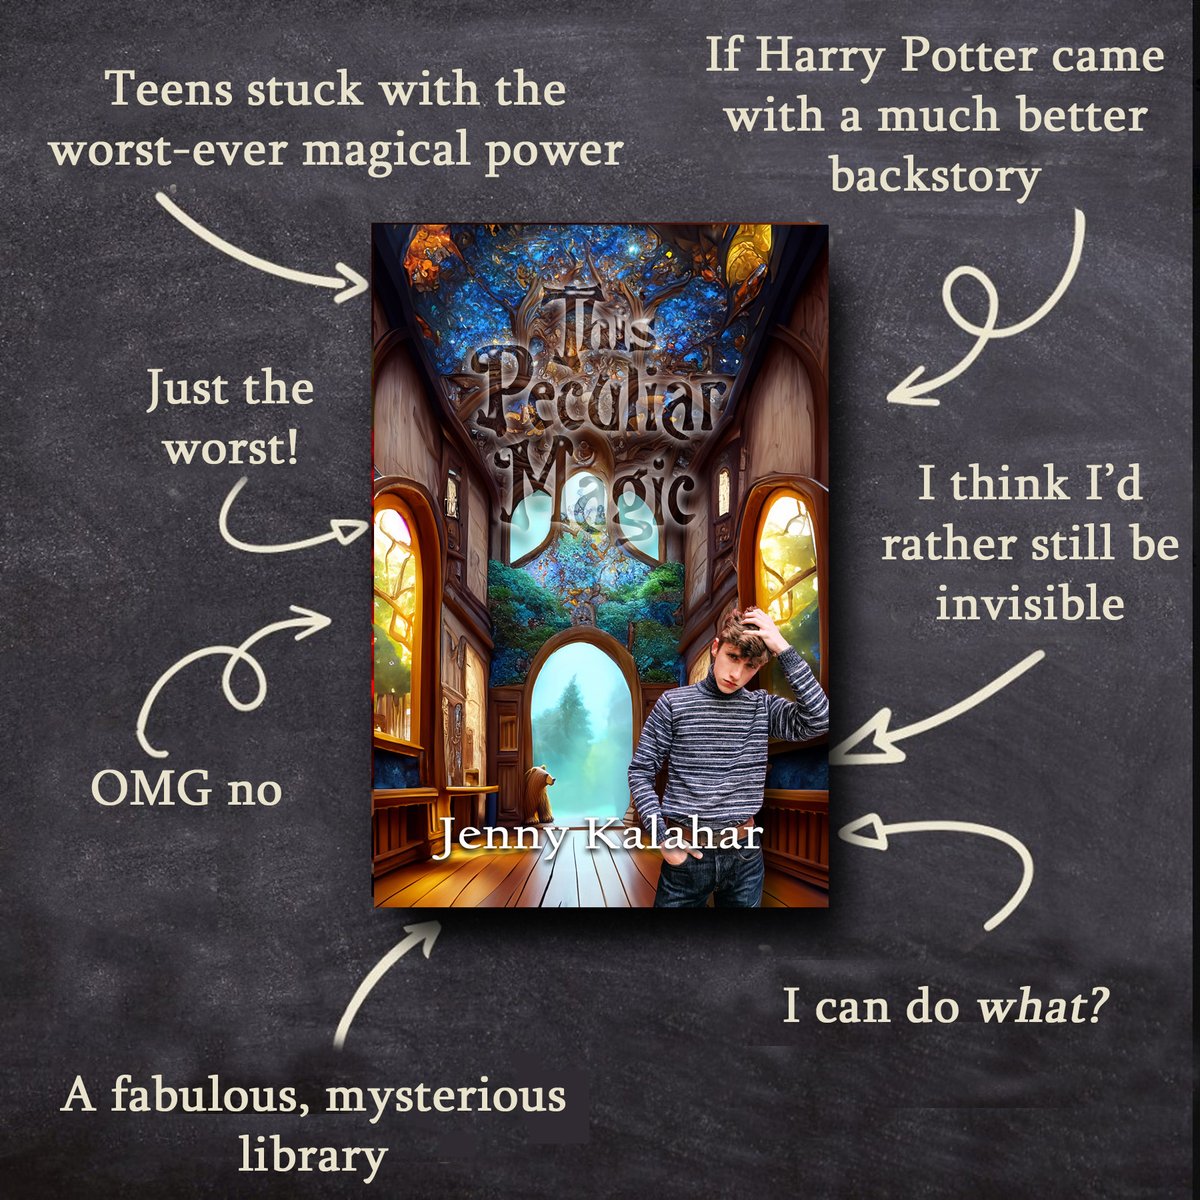 This Peculiar Magic is set in an academy for teens with the worst-ever magical power. Fun, heartbreaking, different. If you always wished Harry Potter had a longer, richer backstory, please check out this book in ebook or softcover worldwide. amazon.com/This-Peculiar-… #teenfantasy